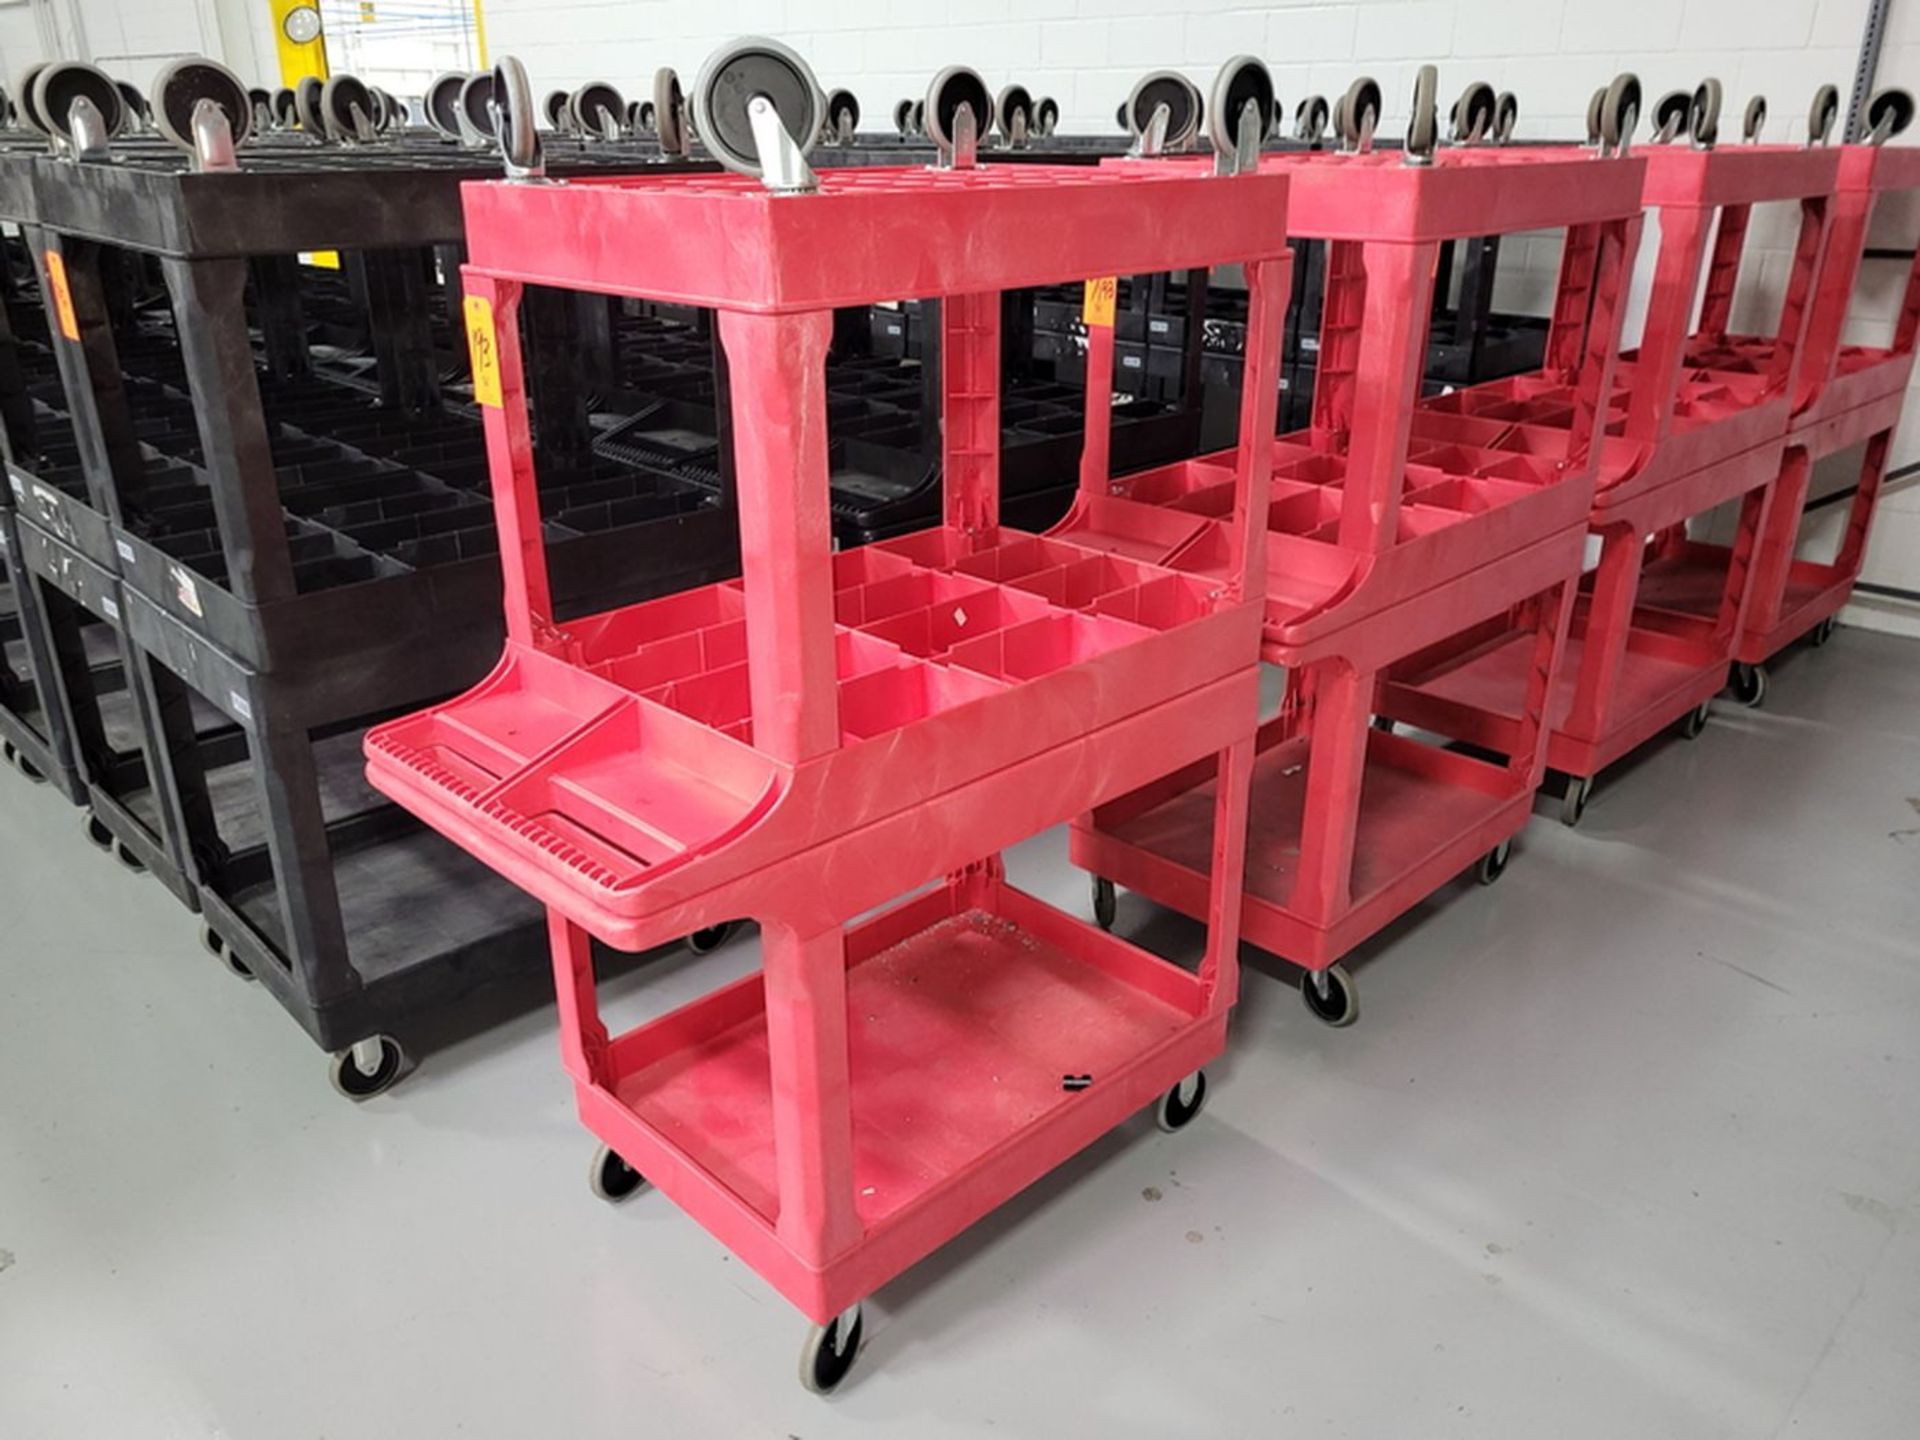 Lot - (4) Uline Poly Flat Shelf Utility Carts; 2-Tier, with Single Side Handle, Overall Size 25